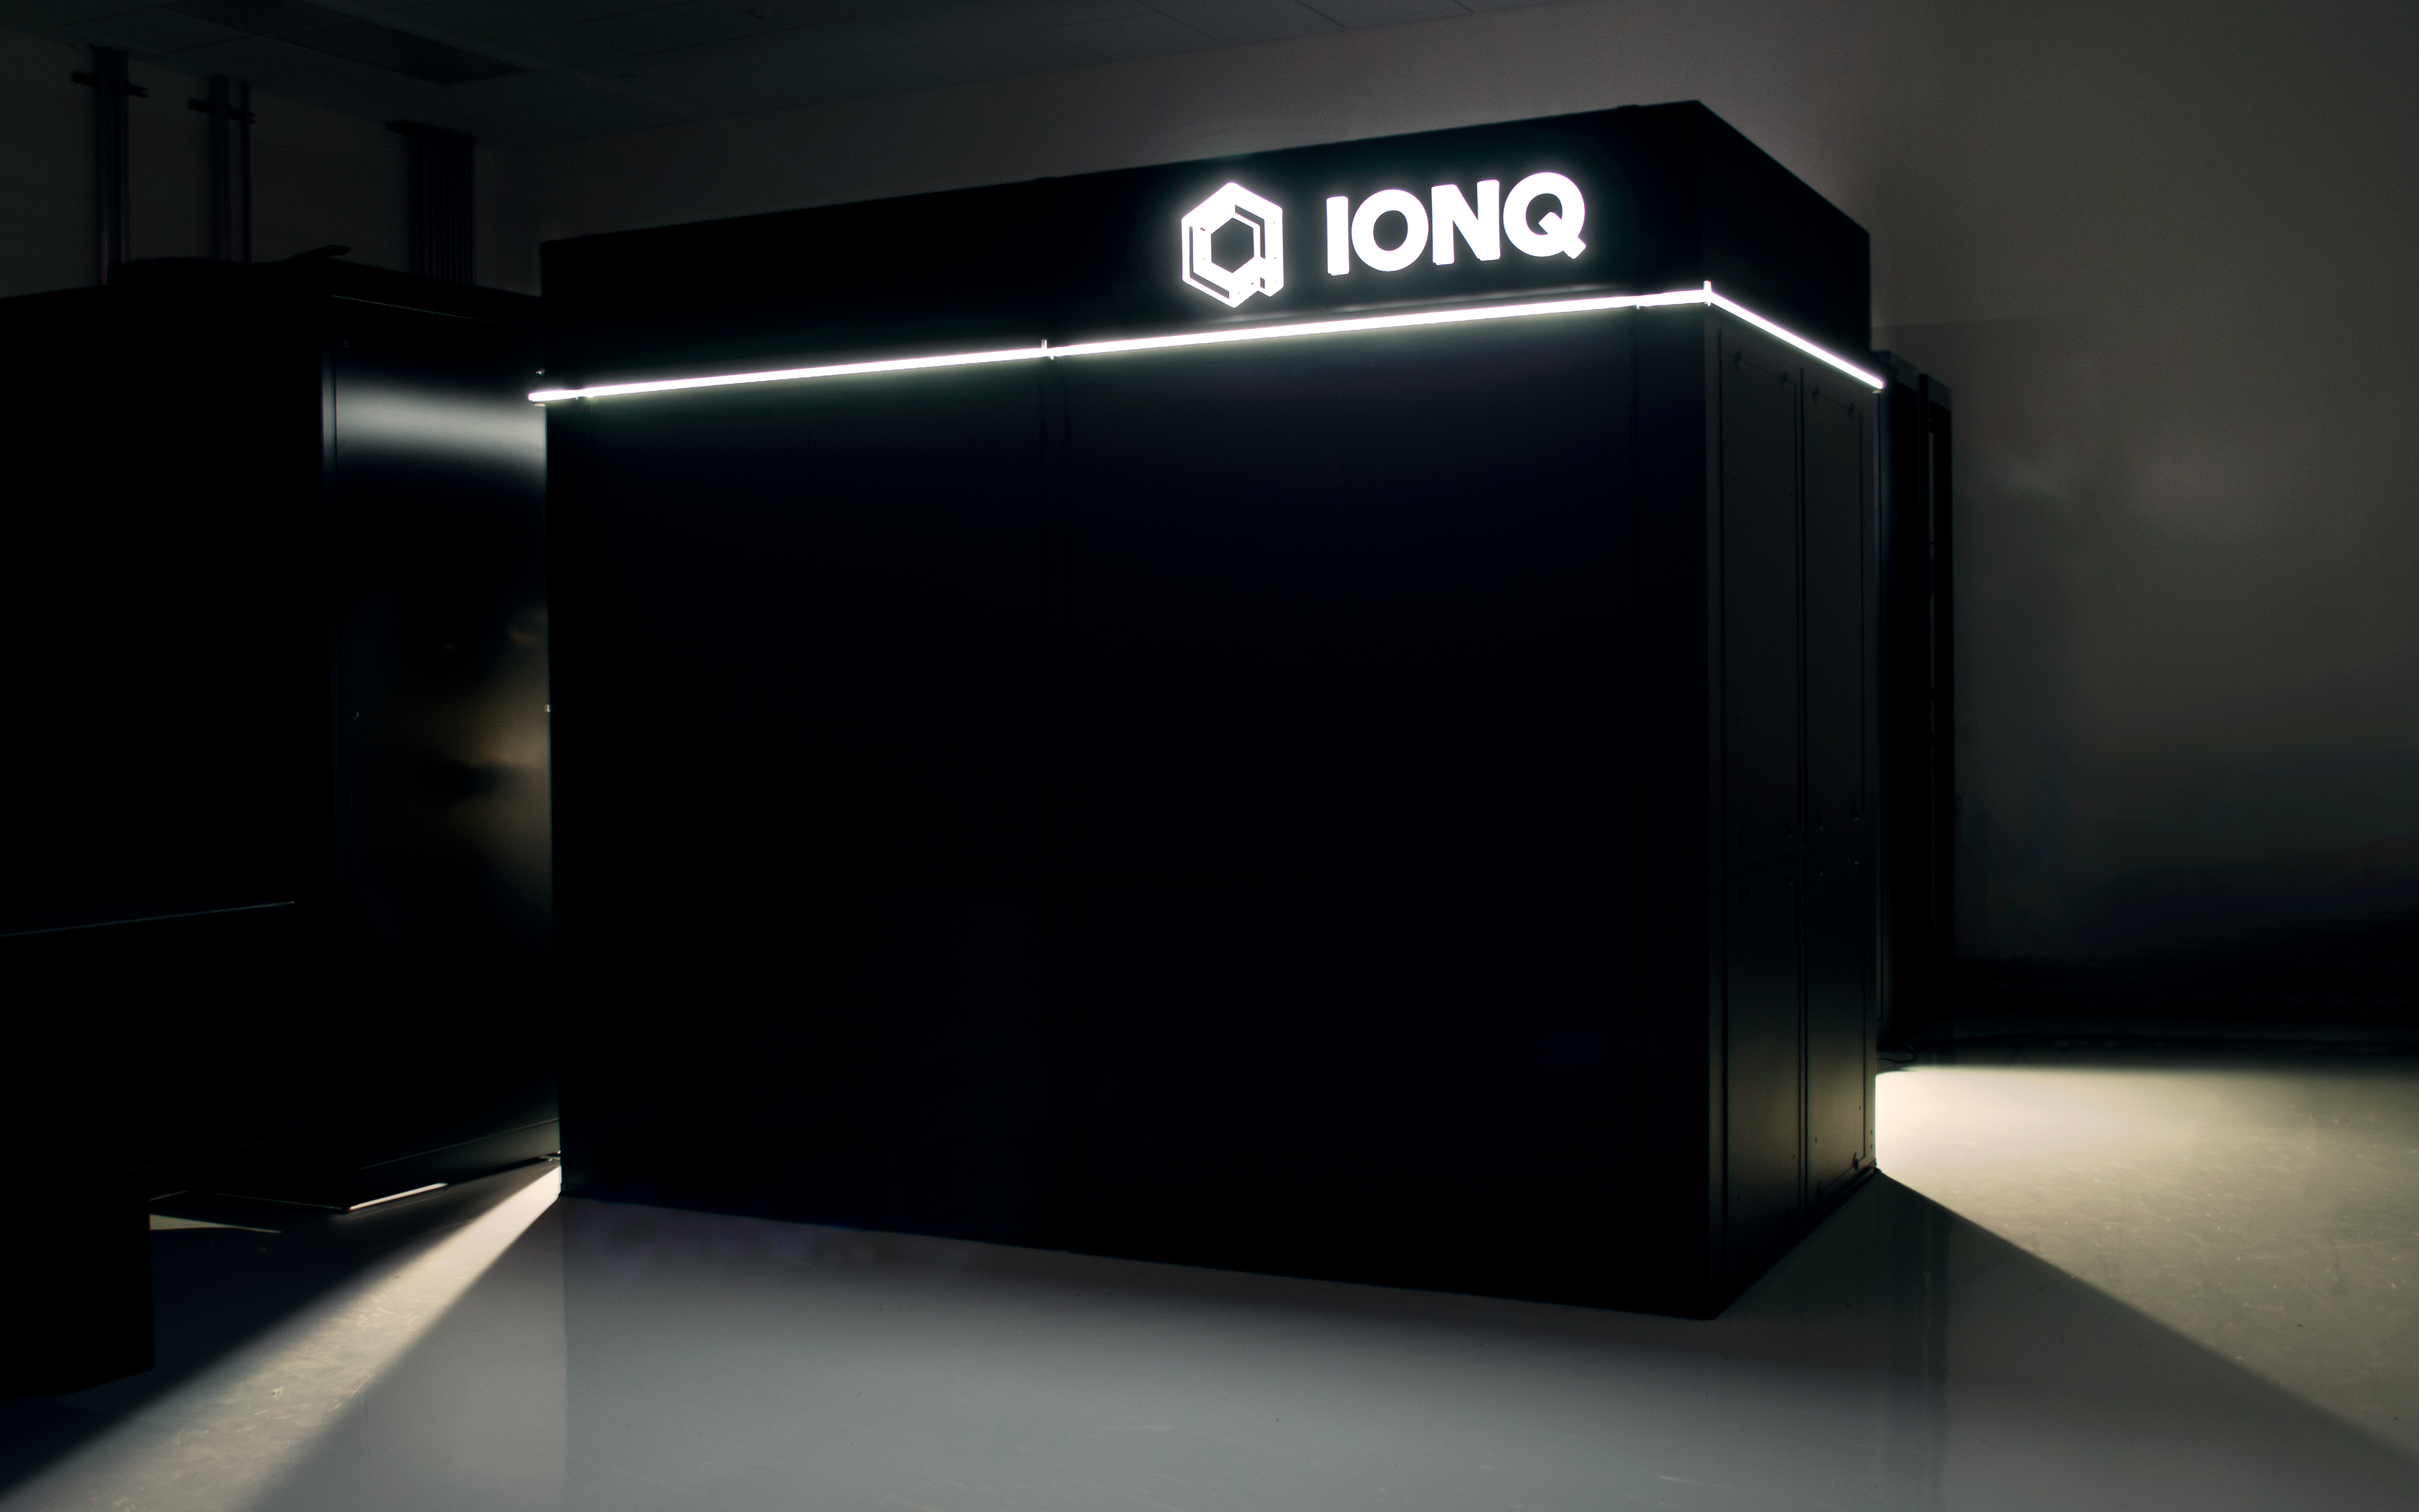 IonQ Enclosure — the outer enclosure for IonQ's next-generation system. It doesn't just look cool, it also creates a highly stable environment (acoustics, temperature, humidity) for the system.